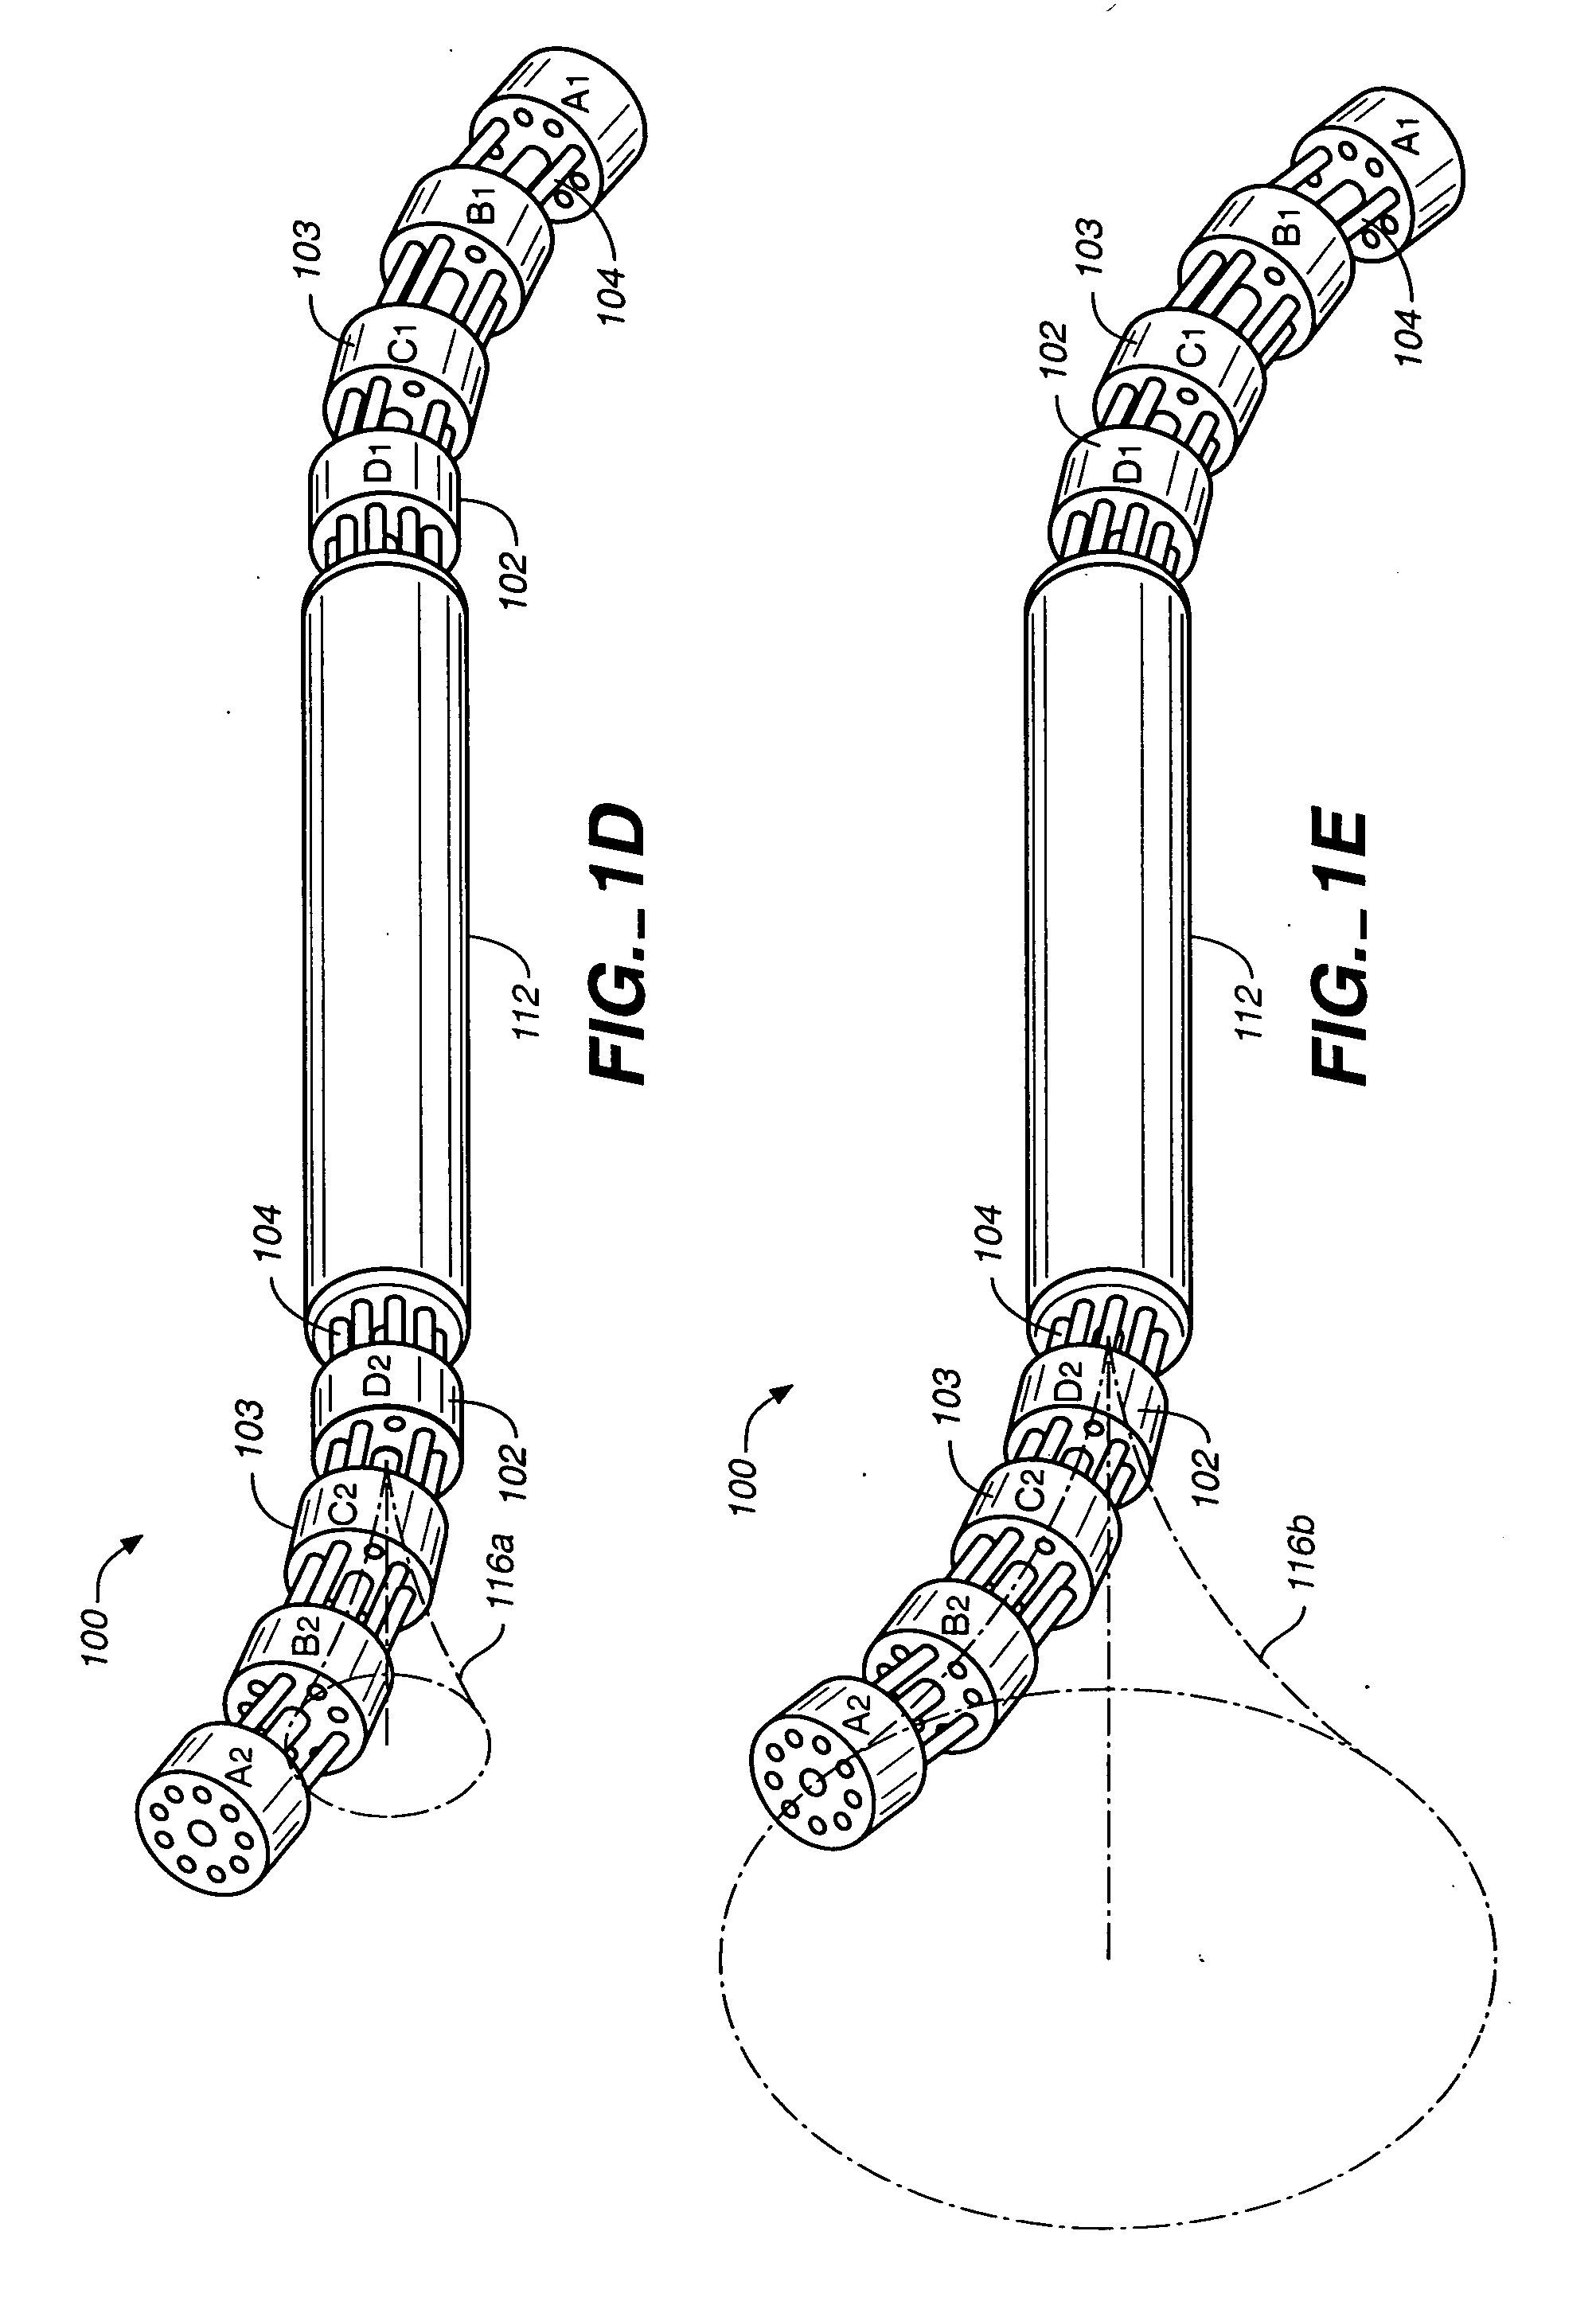 Hand-actuated device for remote manipulation of a grasping tool